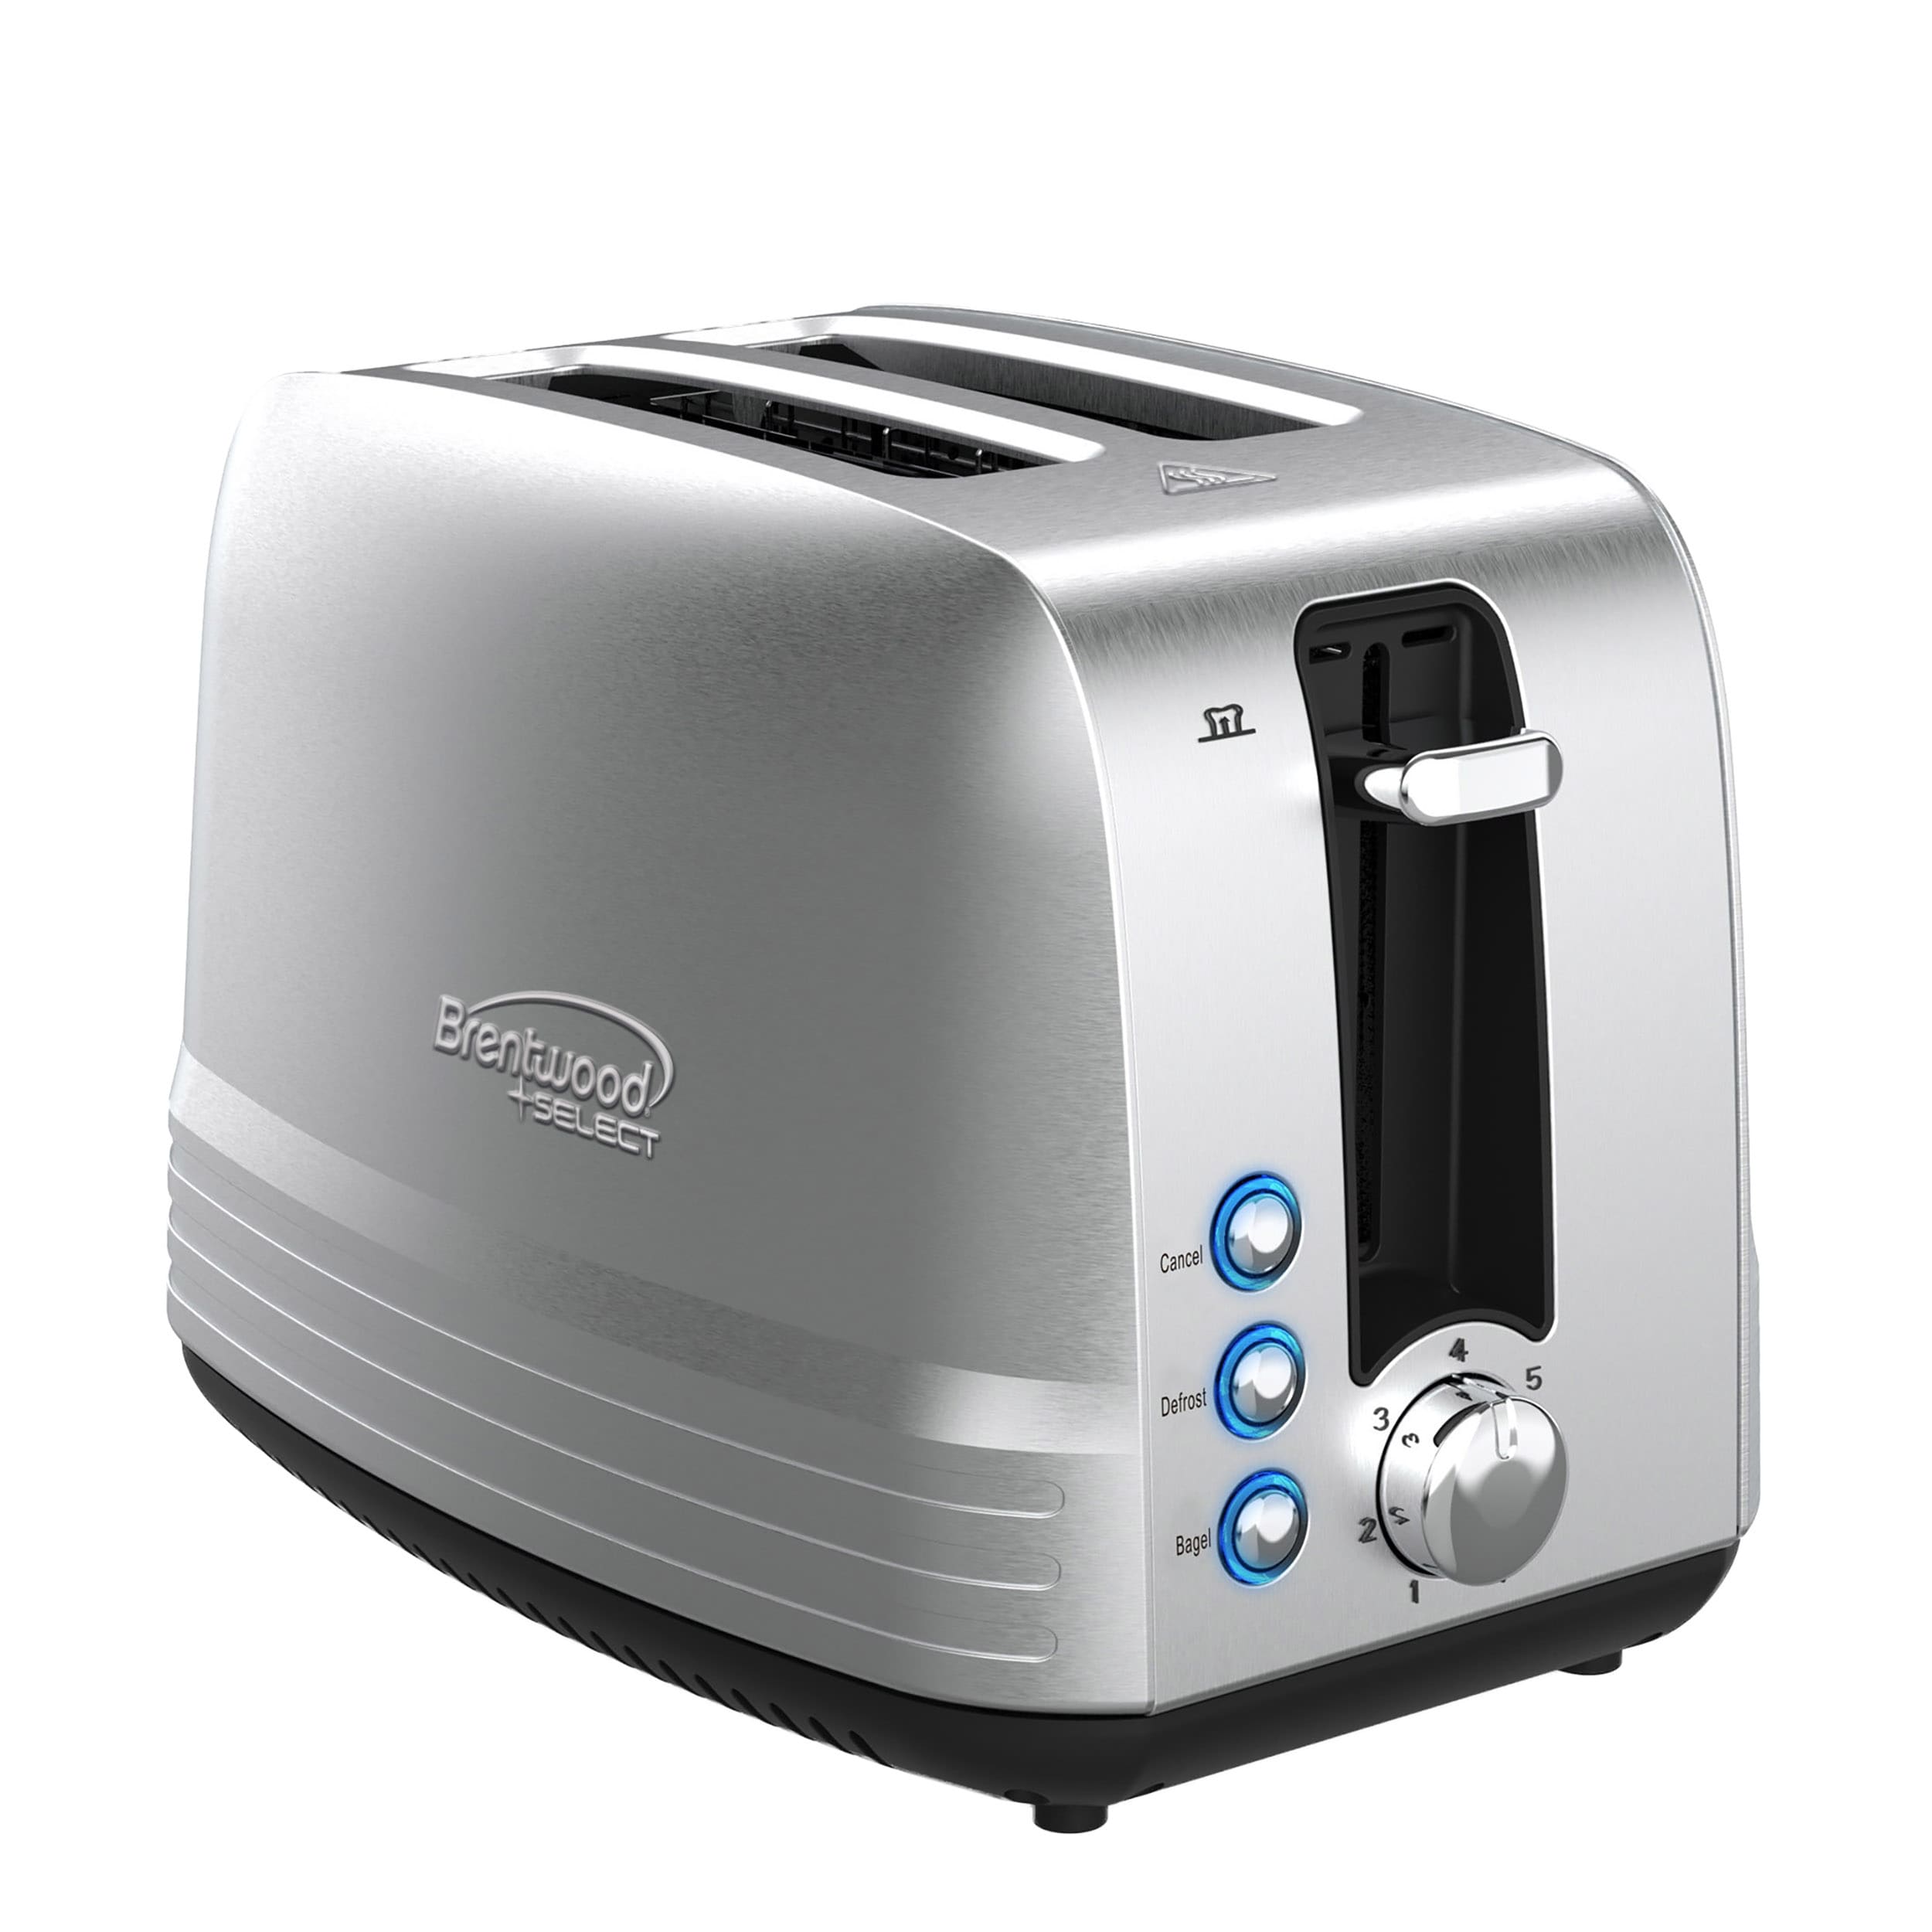 Oster 2 Slice Toaster With Extra-wide Slots In Brushed Stainless